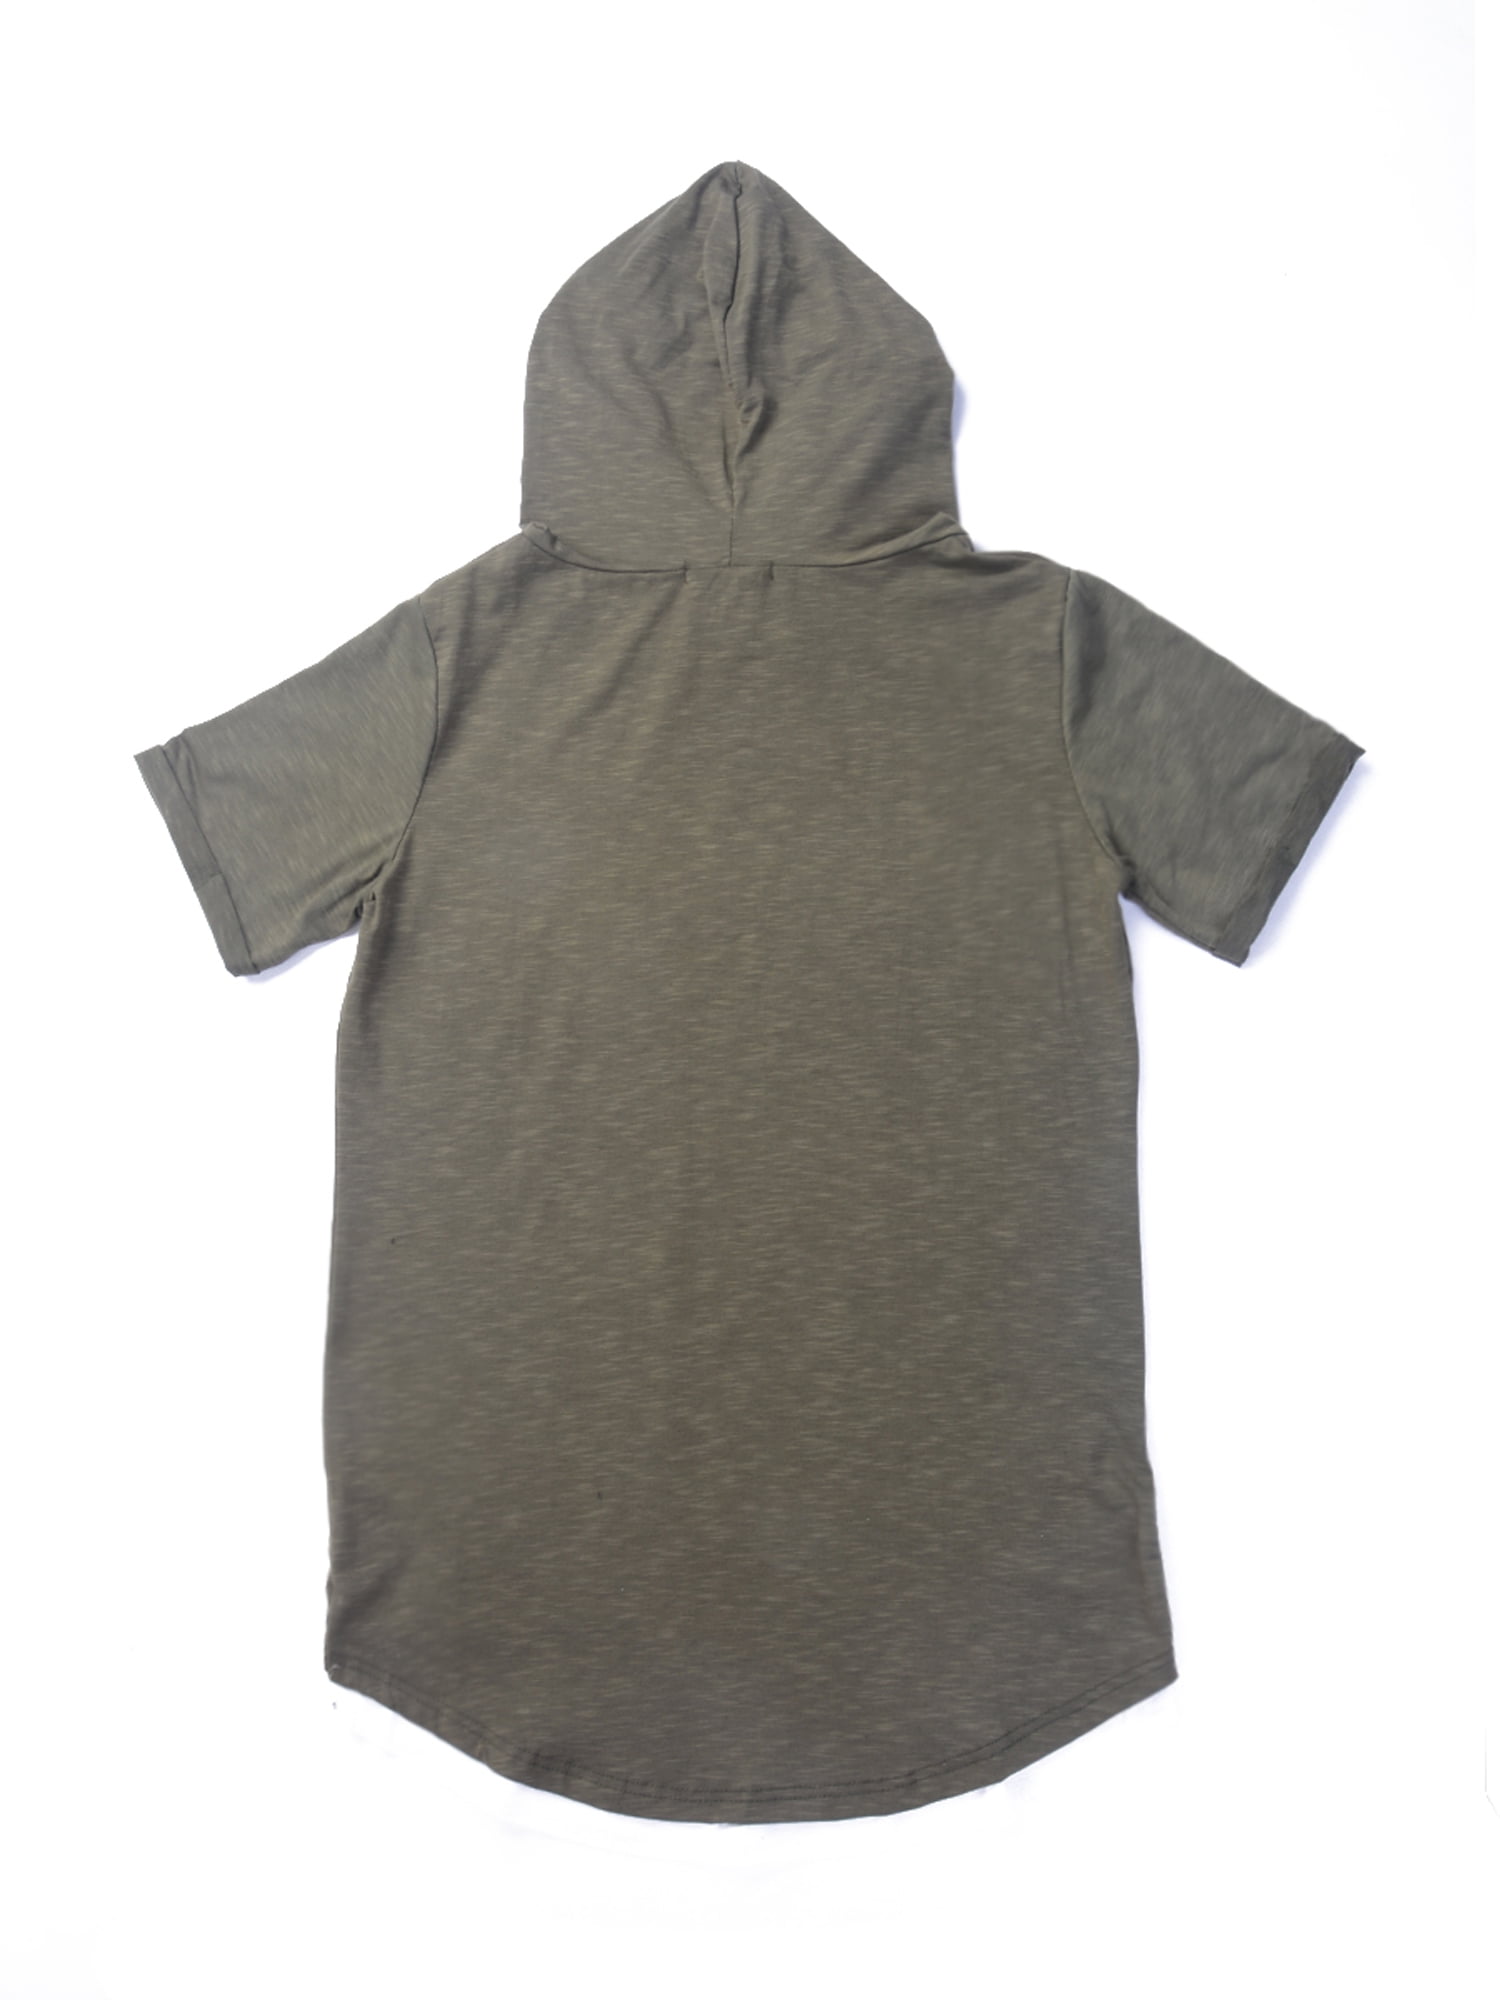 Alalaso Breastfeeding Hoodie Hooded Shirt for Men Baggy Midweight